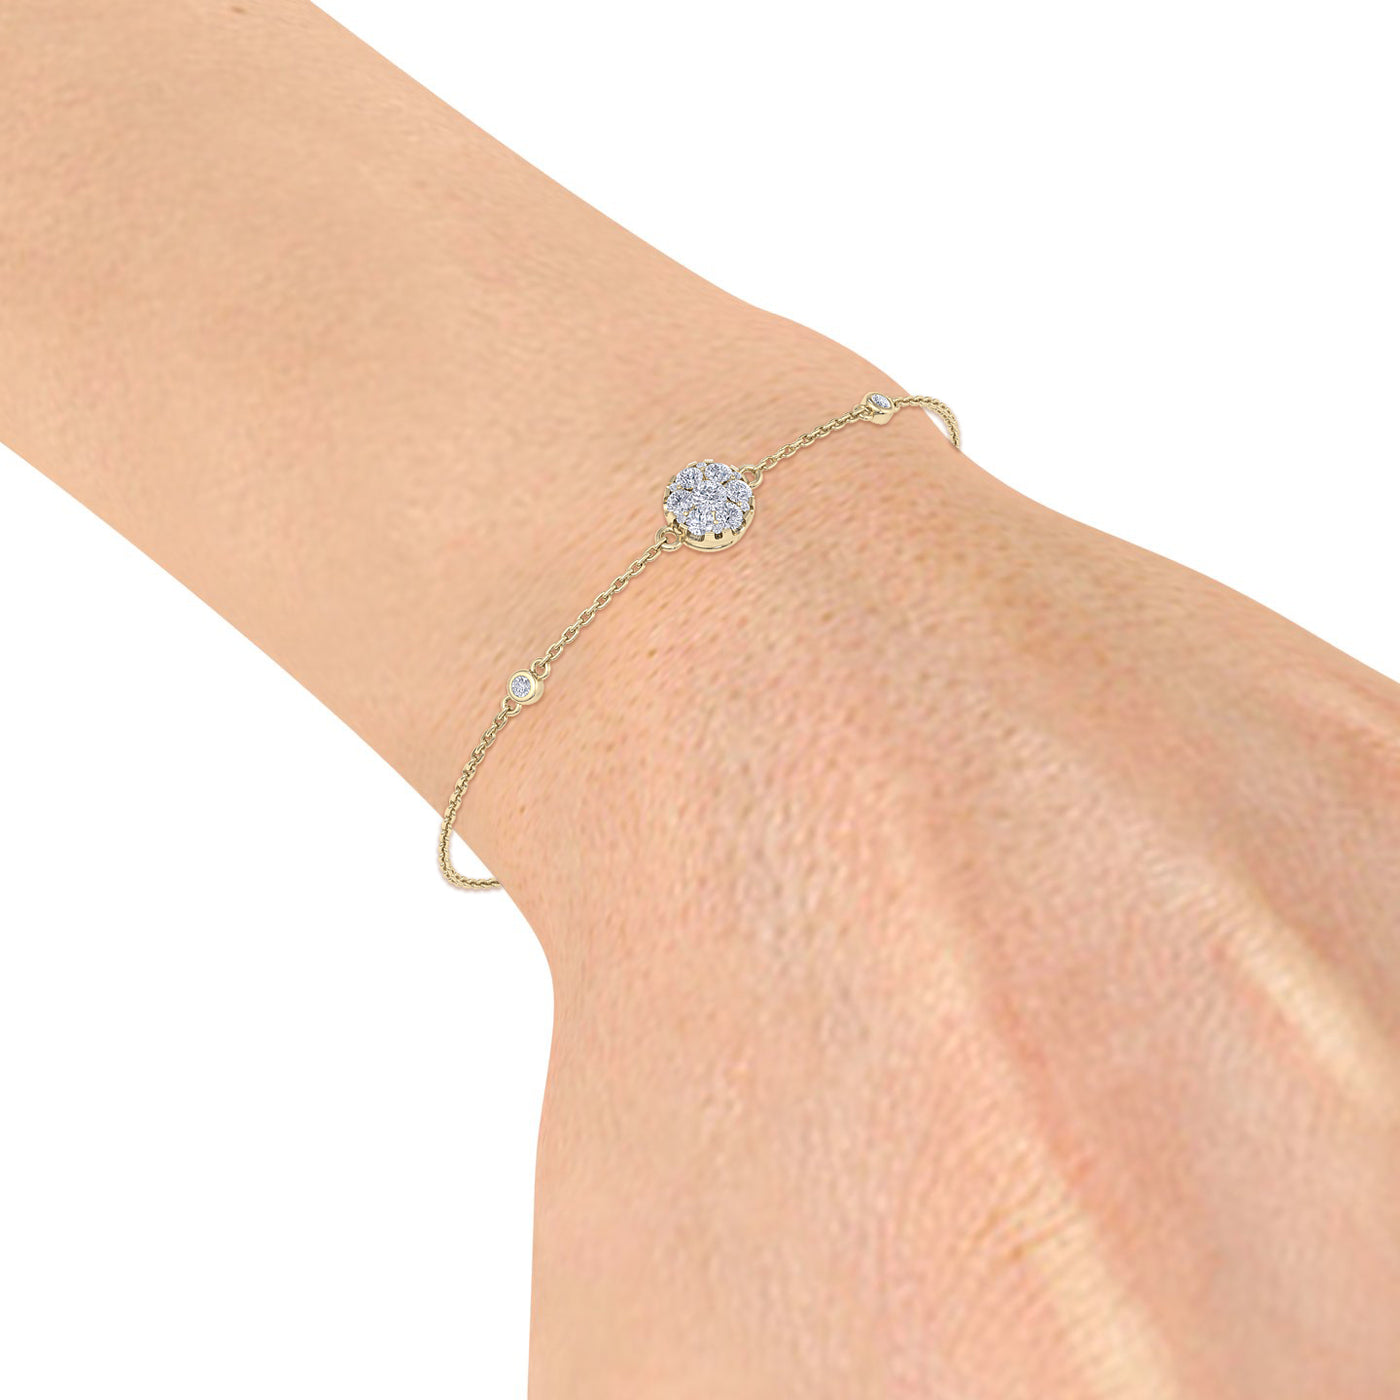 Round shape bracelet in white gold with diamonds of 0.42 ct in weight - HER DIAMONDS®